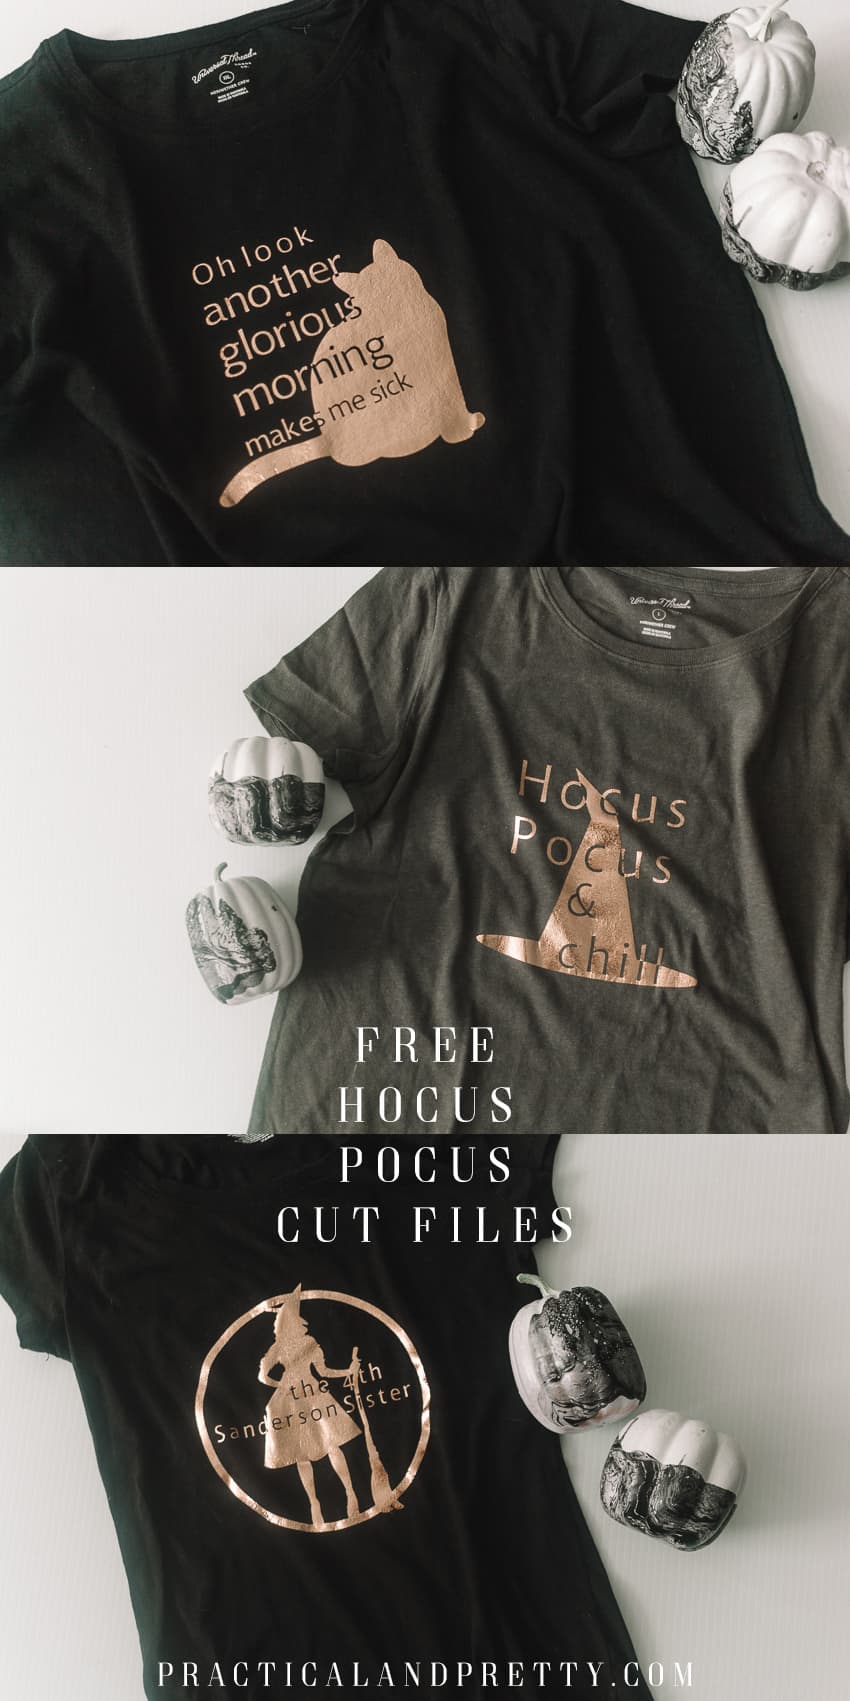 I've got three free different Hocus Pocus shirts designed for your favorite Hocus Pocus fan. Or maybe even you and two friends!